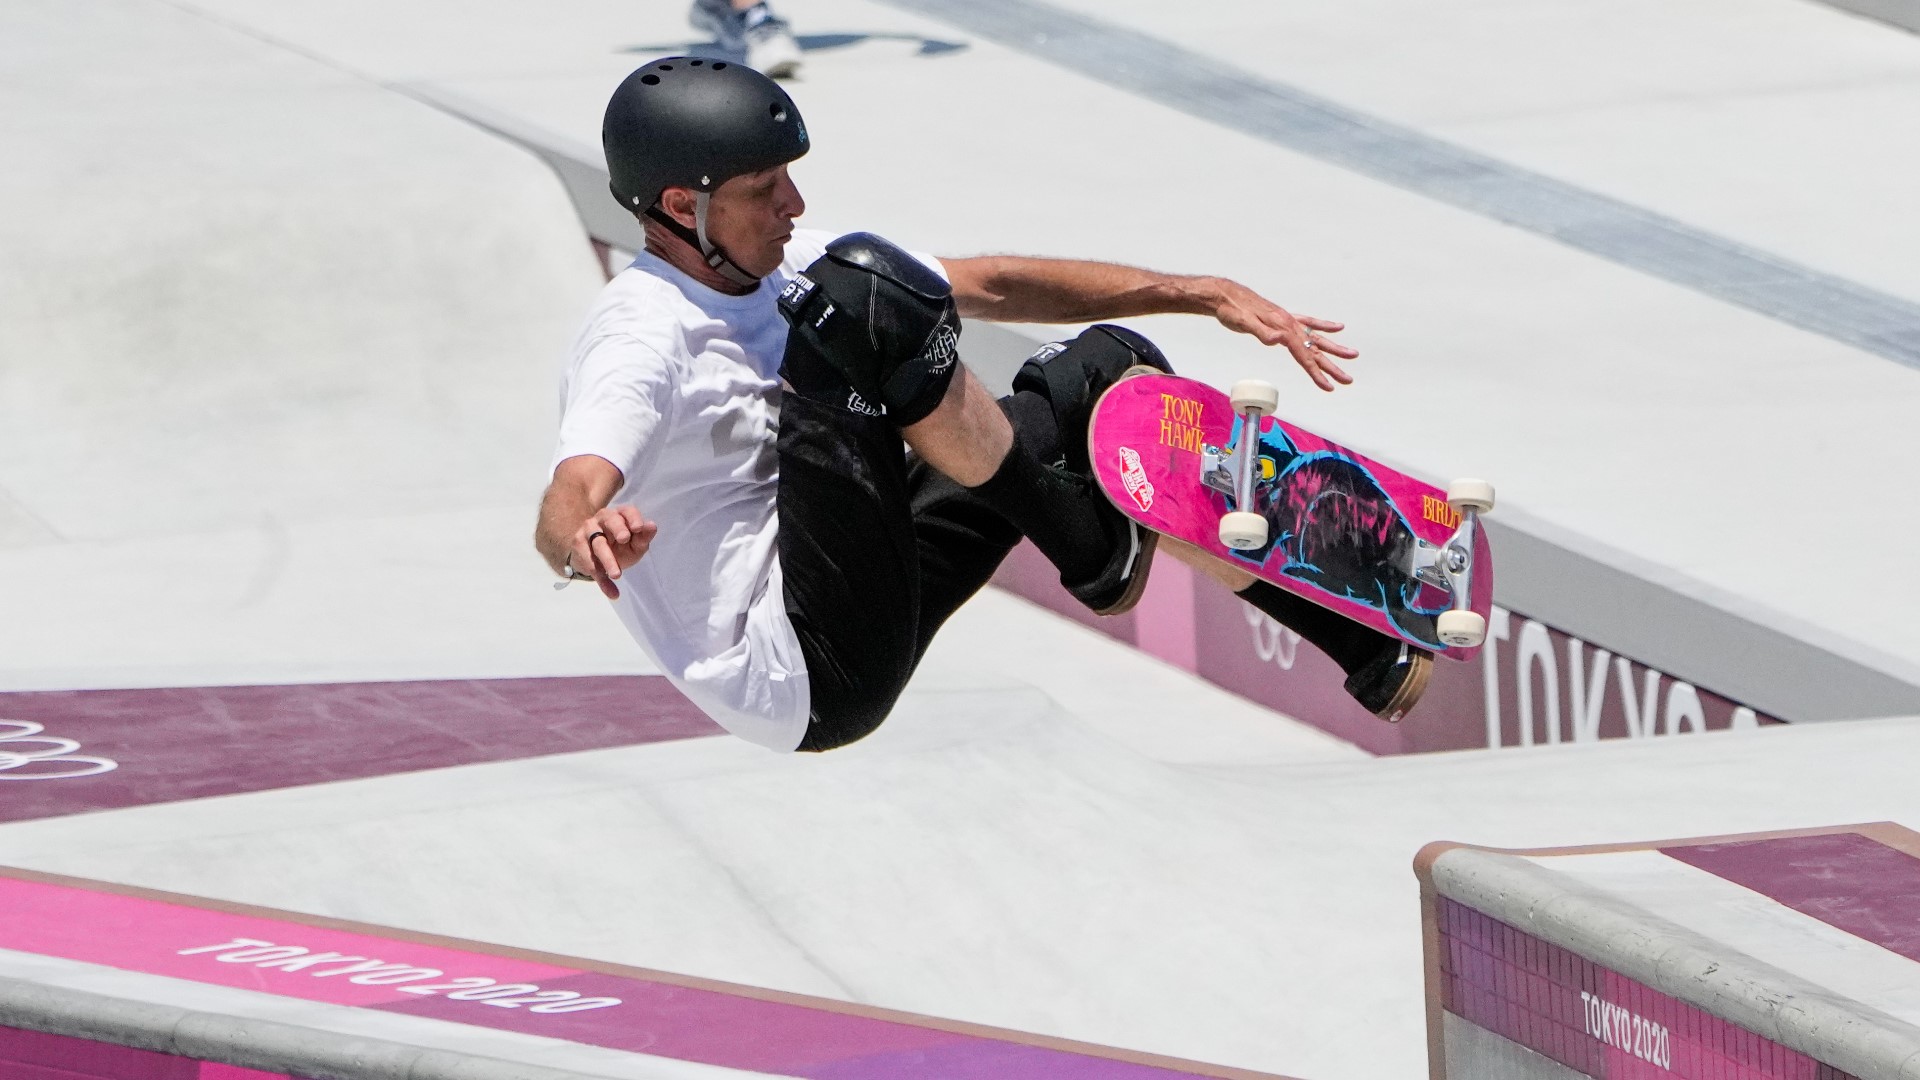 Beach volleyball duo April Ross and Alix Klineman are onto the semifinals and the first ever men's park skateboarding finals will take place.